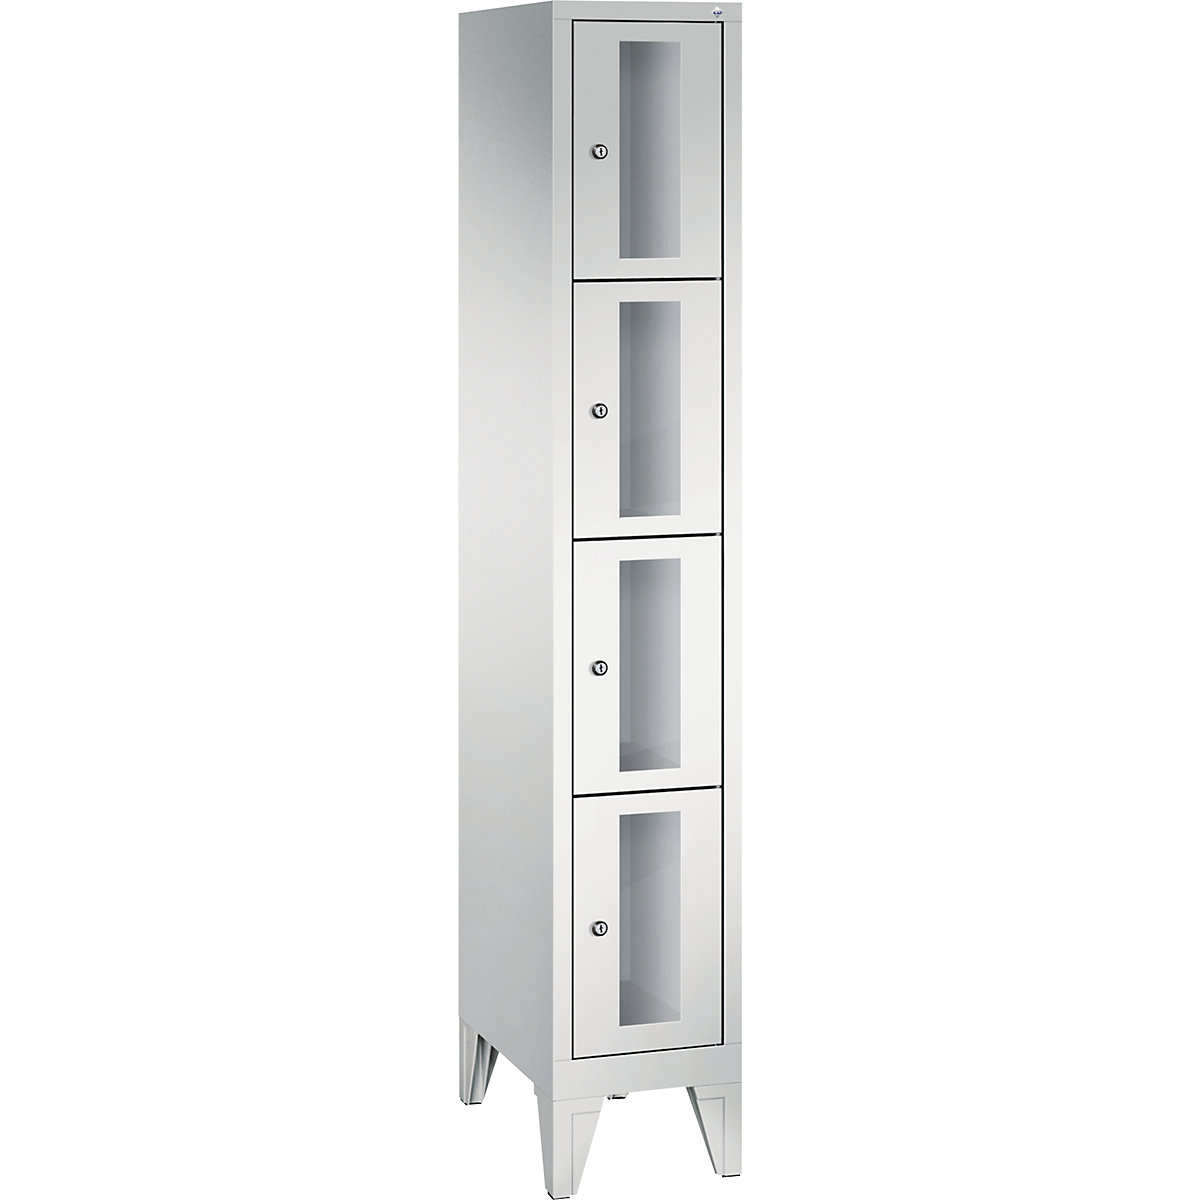 CLASSIC locker unit, compartment height 375 mm, with feet – C+P, 4 compartments, width 320 mm, light grey door